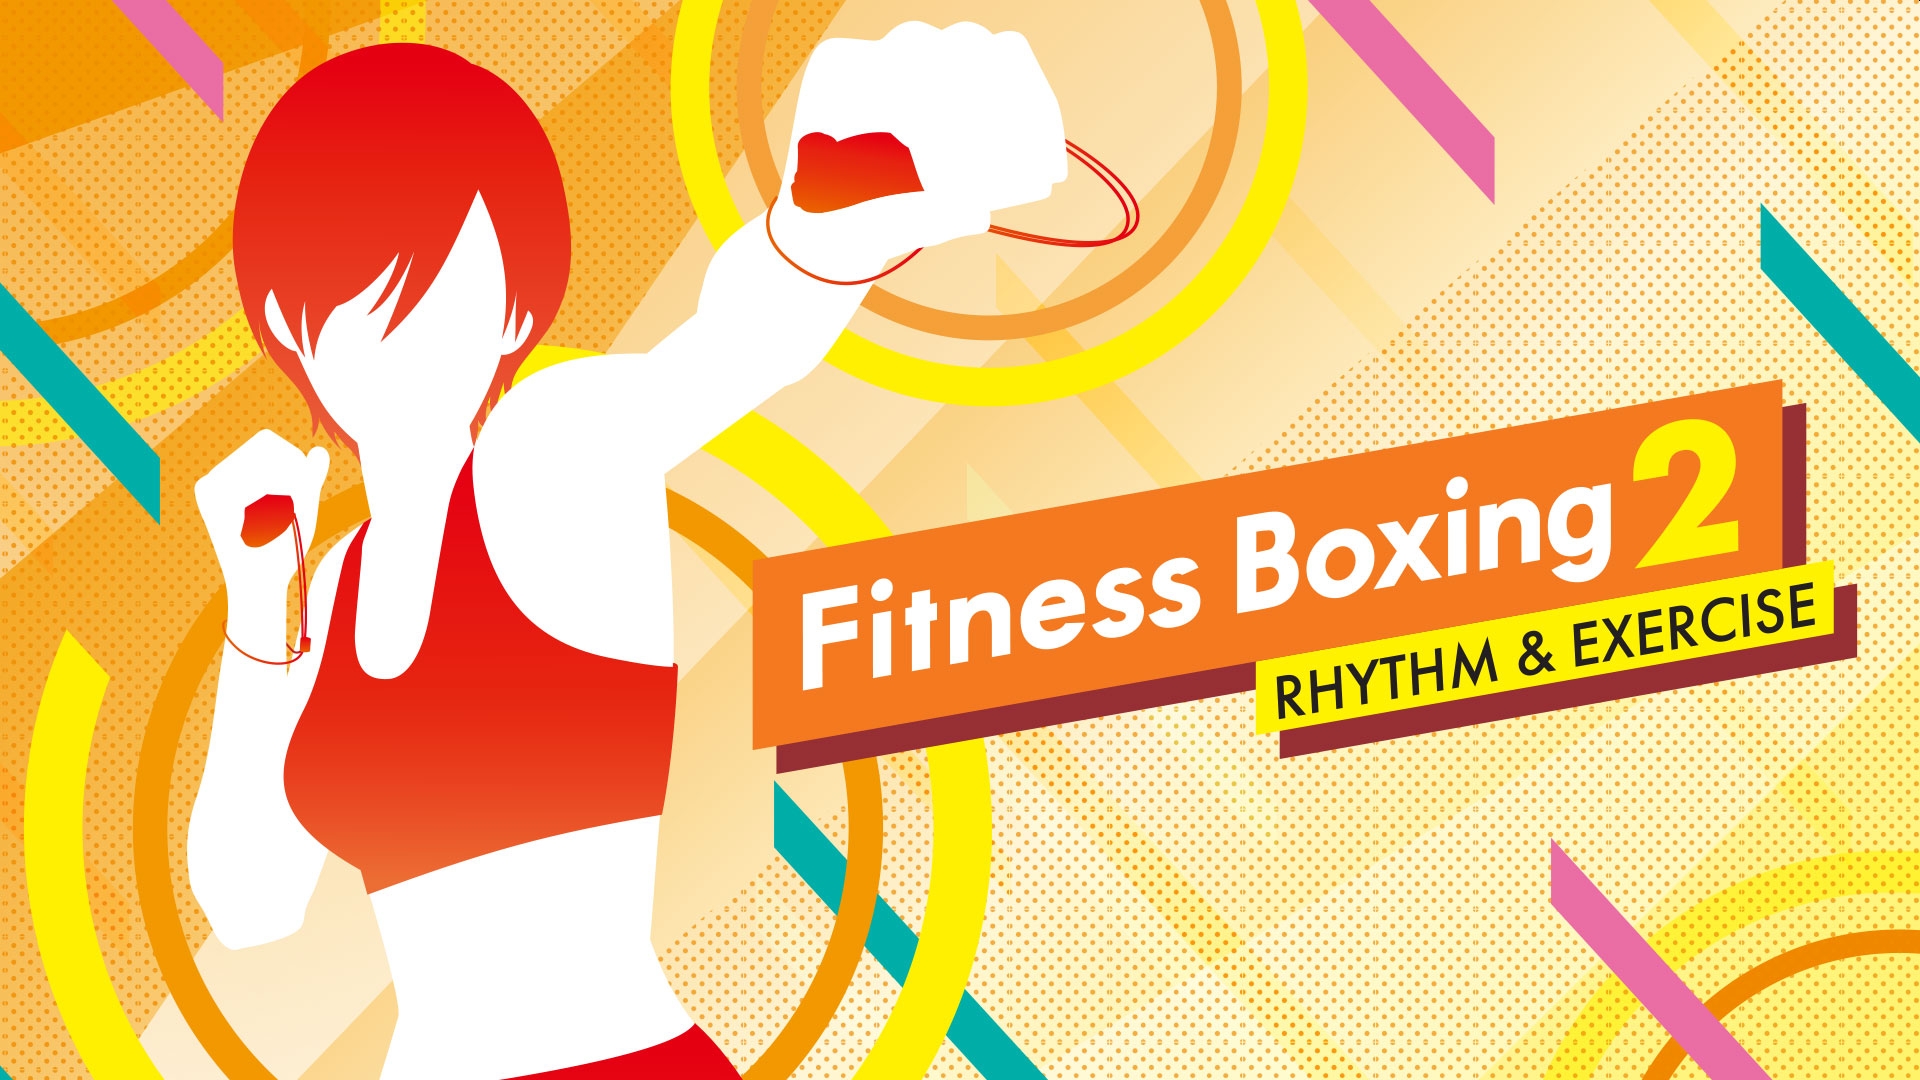 Fitness Boxing 2: Rhythm And Exercise First Day Update Adds “Devil” Mode In Japan